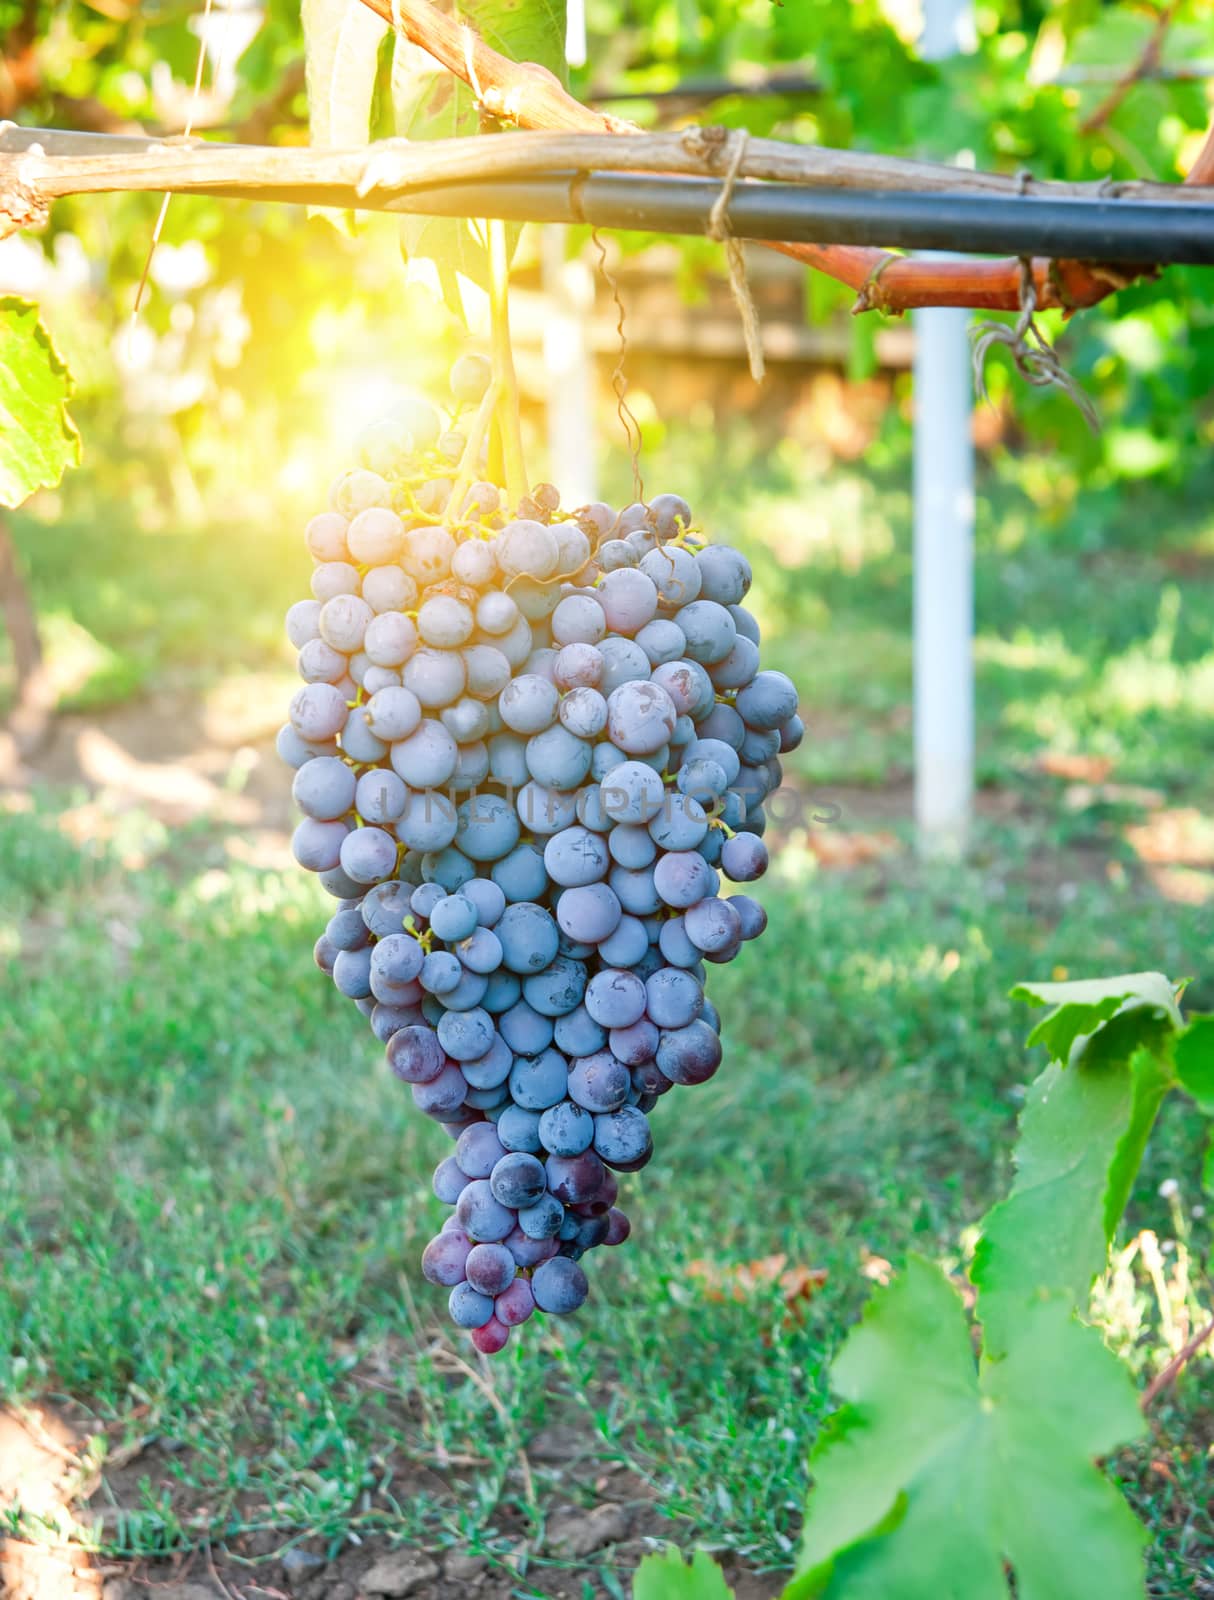 Ripening grape clusters on the vine by Zhukow